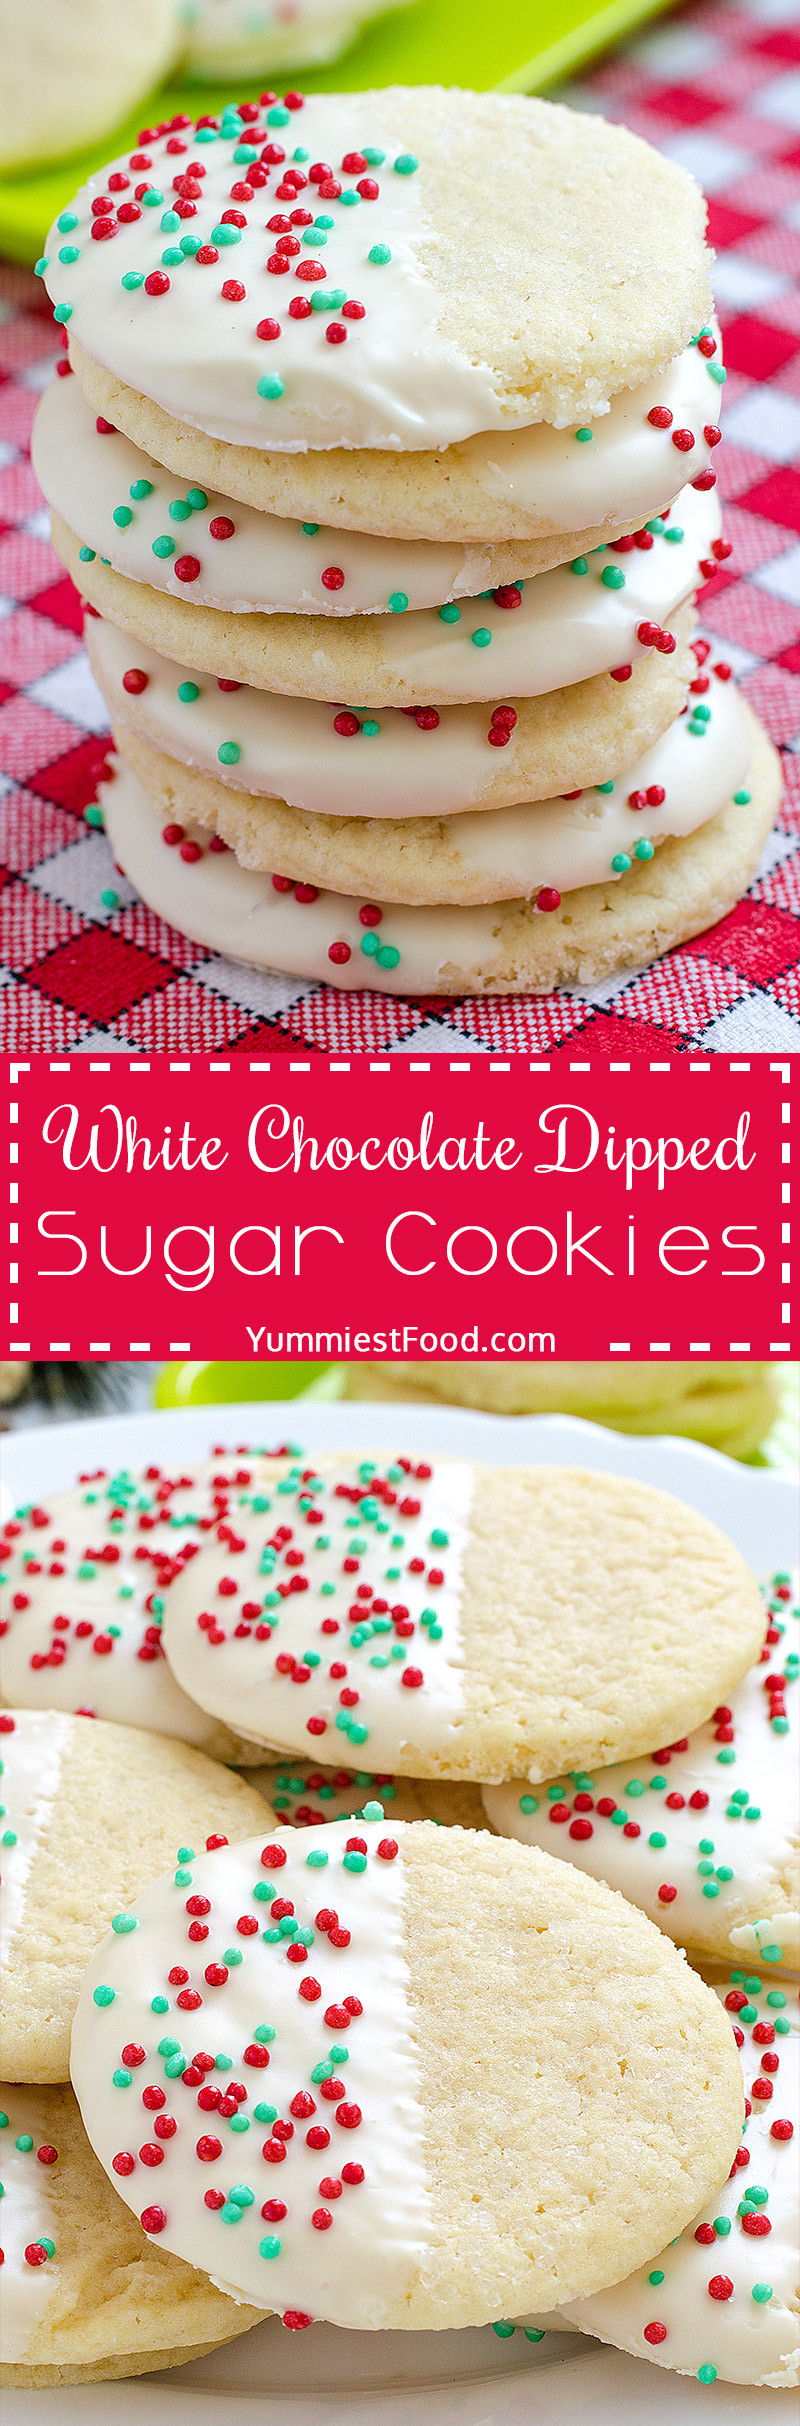 Dipped Sugar Cookies
 White Chocolate Dipped Sugar Cookies Recipe from